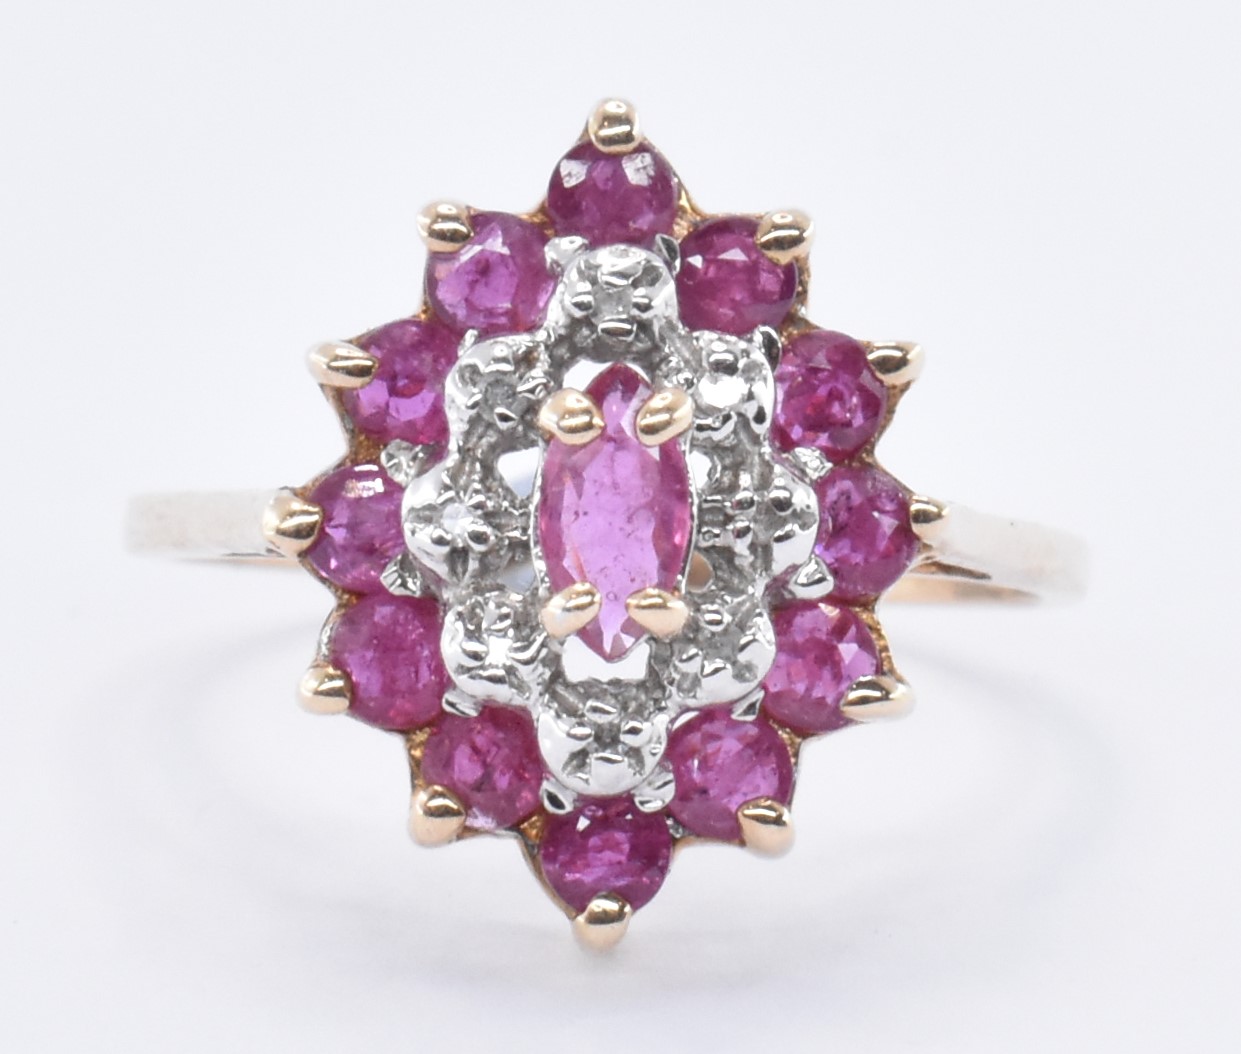 9CT GOLD CLUSTER RING WITH RUBIES AND DIAMONDS - Image 2 of 7